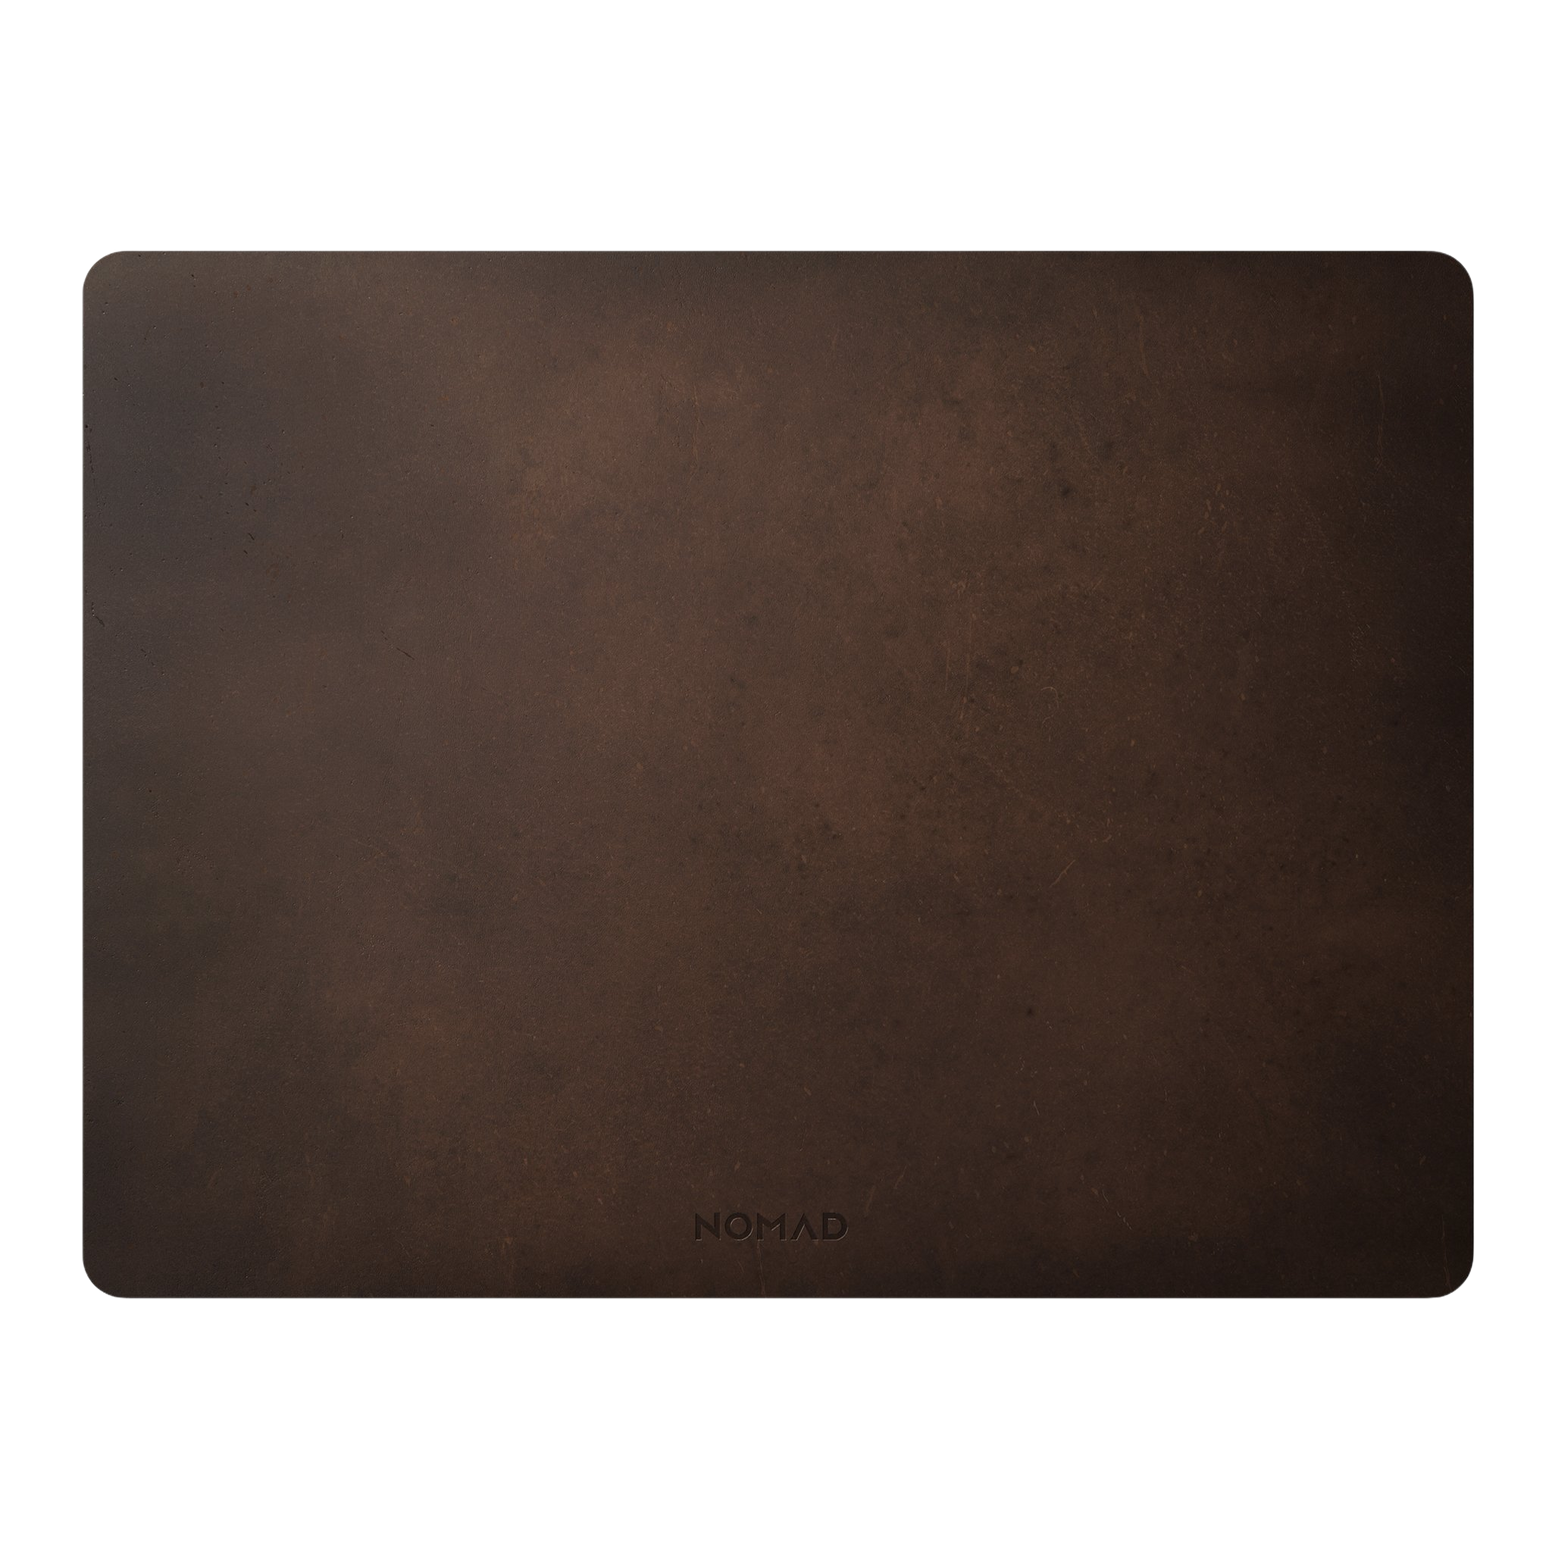 Nomad Horween Leather Mousepad 13 Inch - Rustic Brown - Discontinued